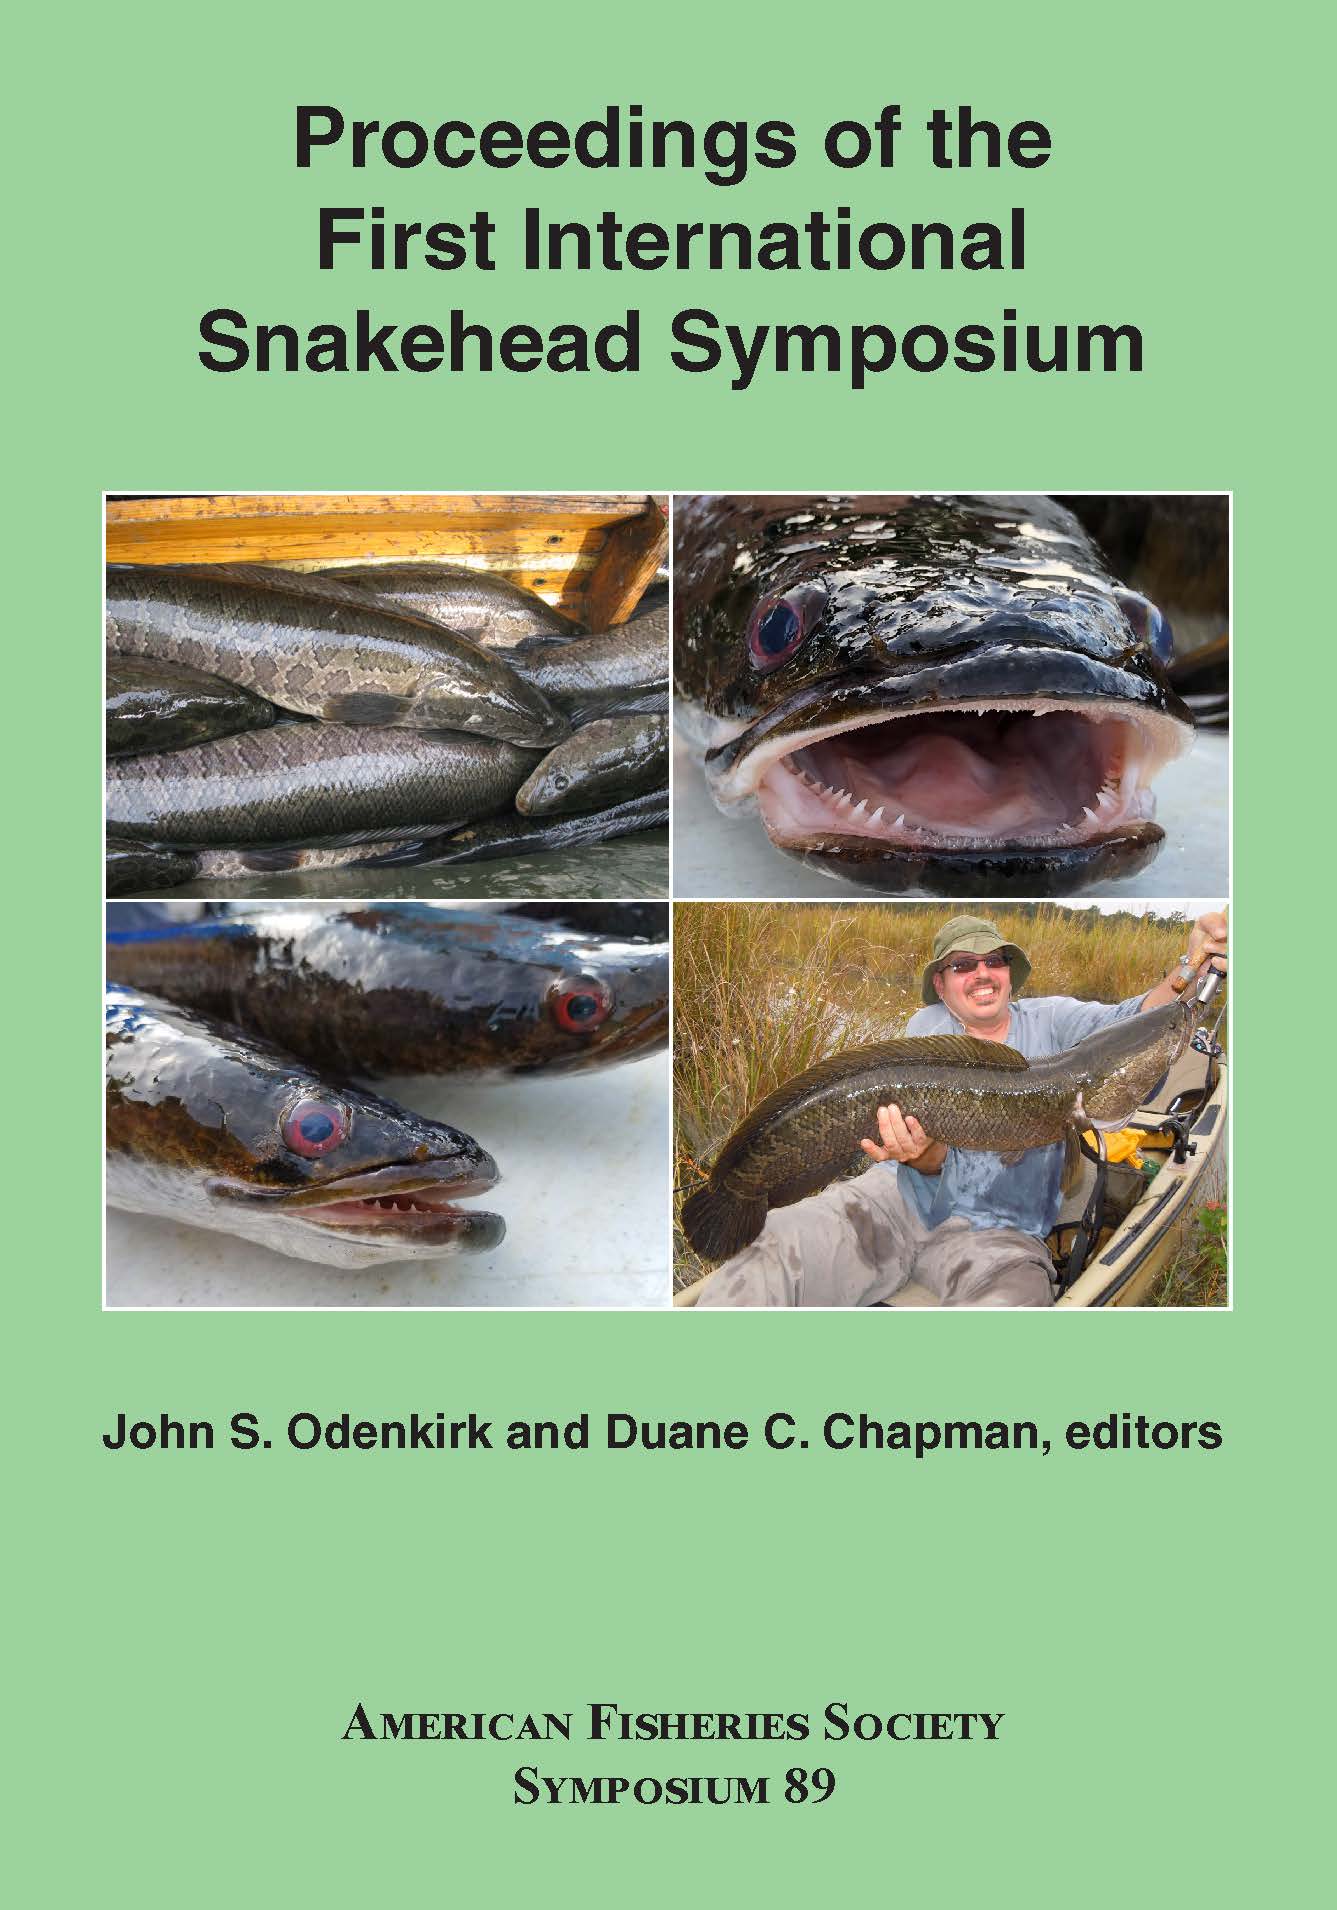 Replying to @wukillerbee_md Northern Snakeheads are an